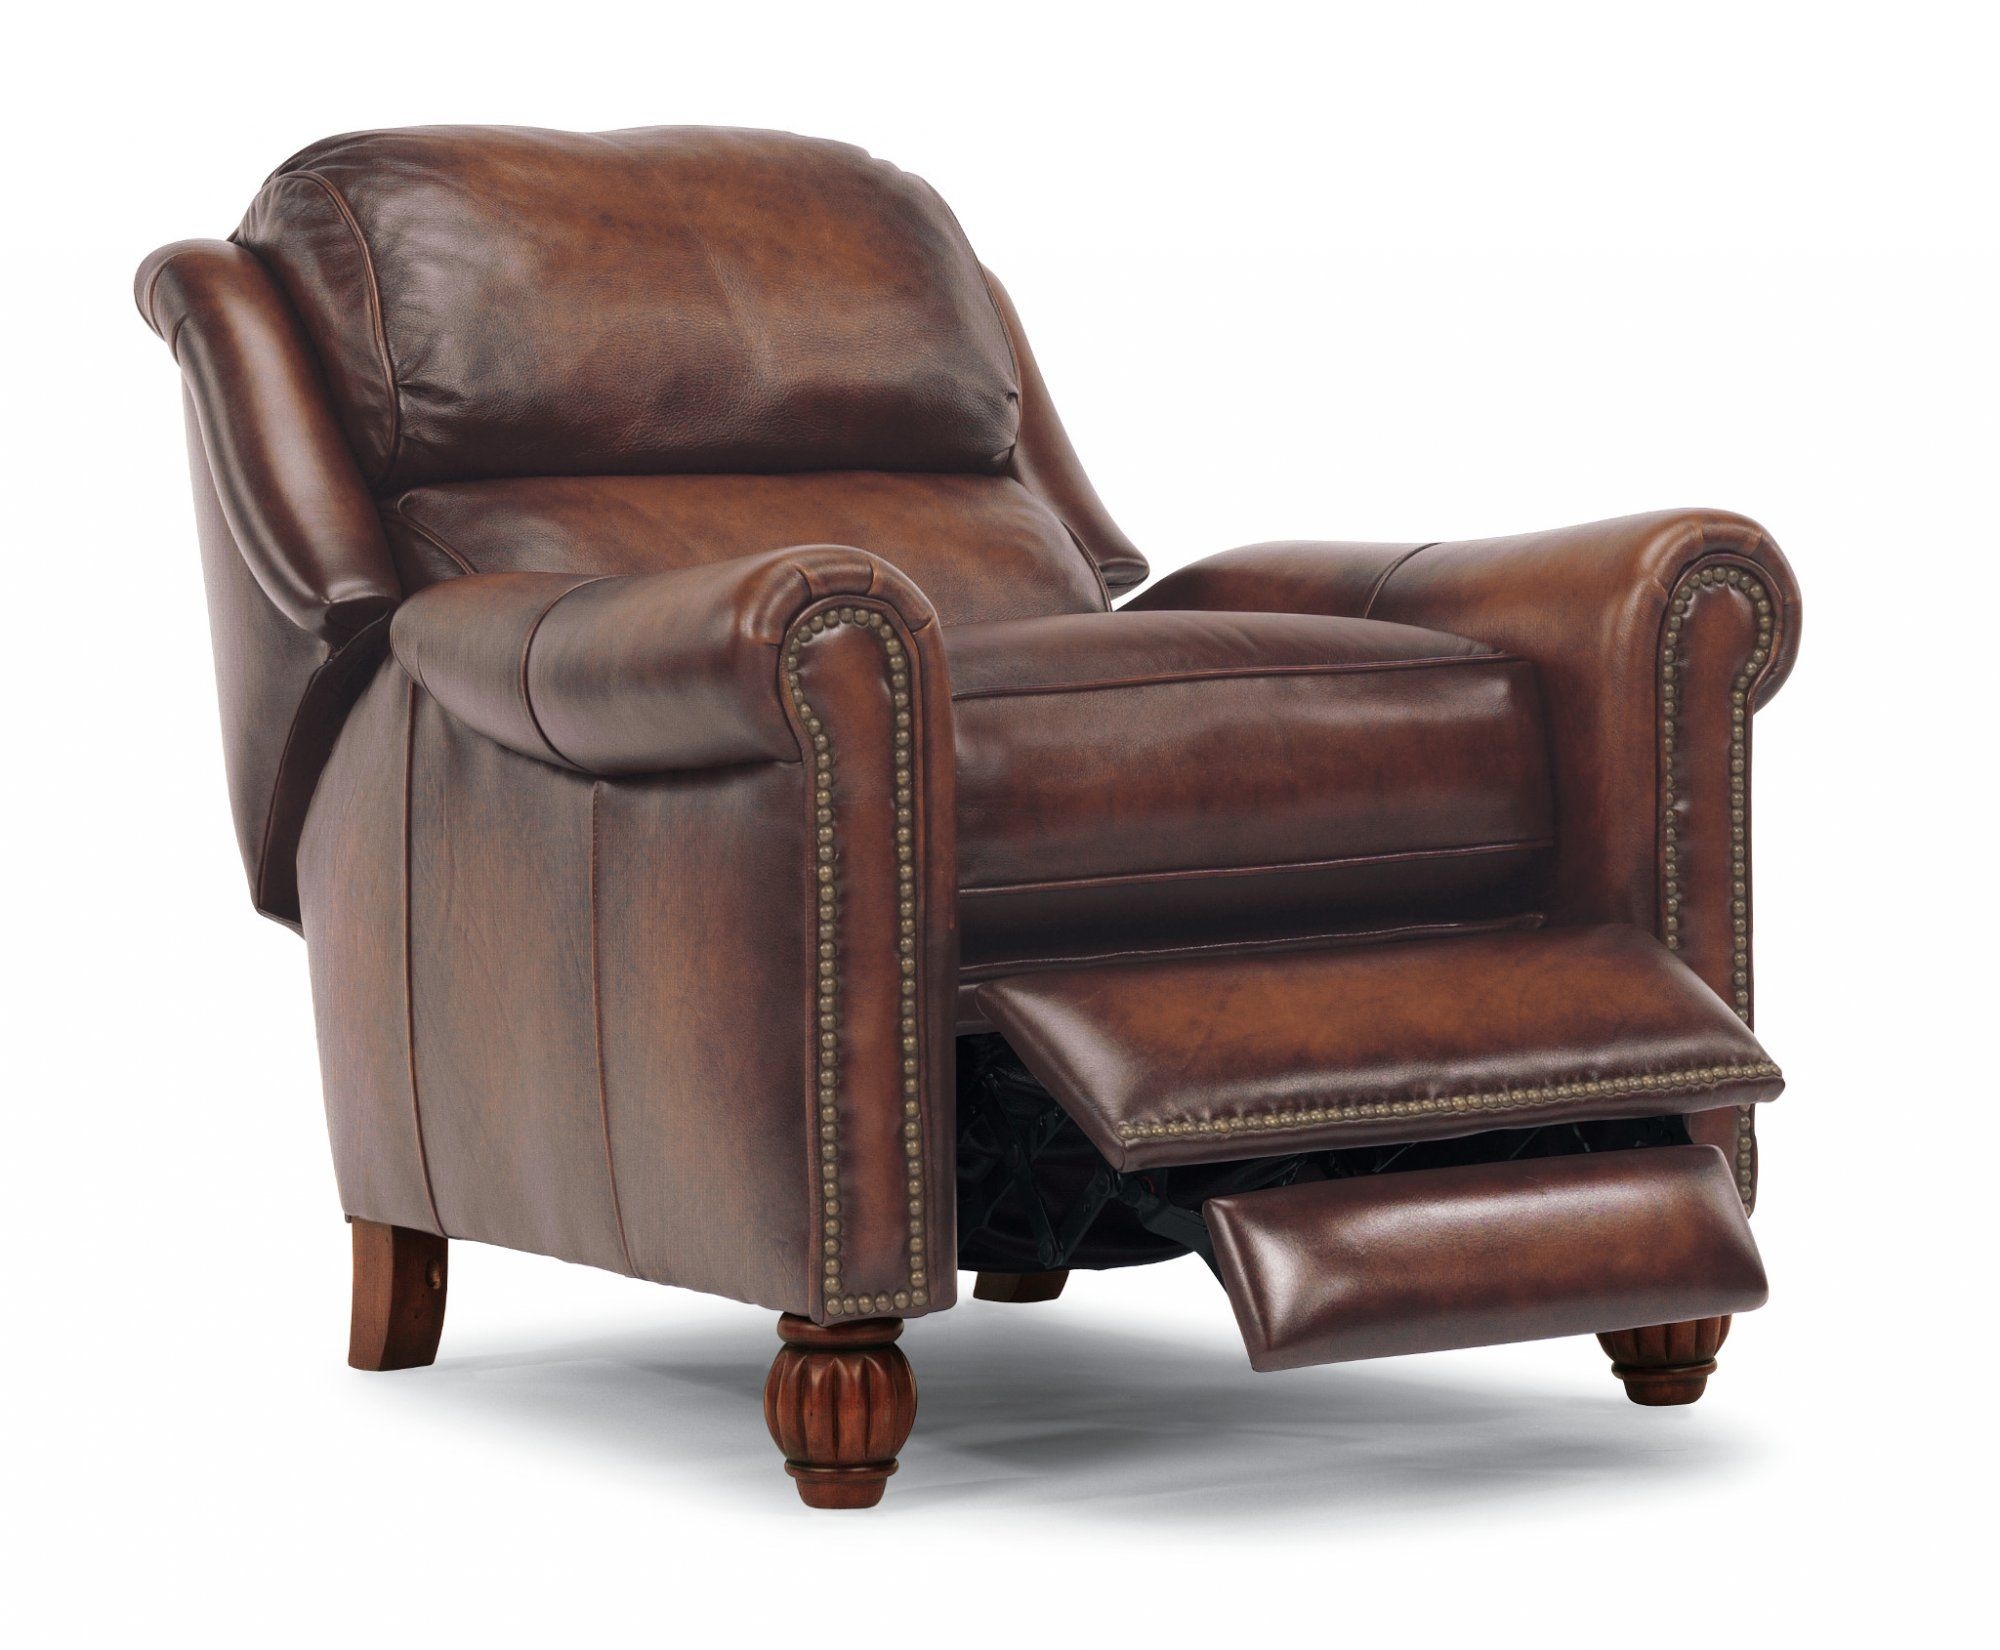 Recliners For Small Spaces Visualhunt, Light Tan Leather Recliner Chair